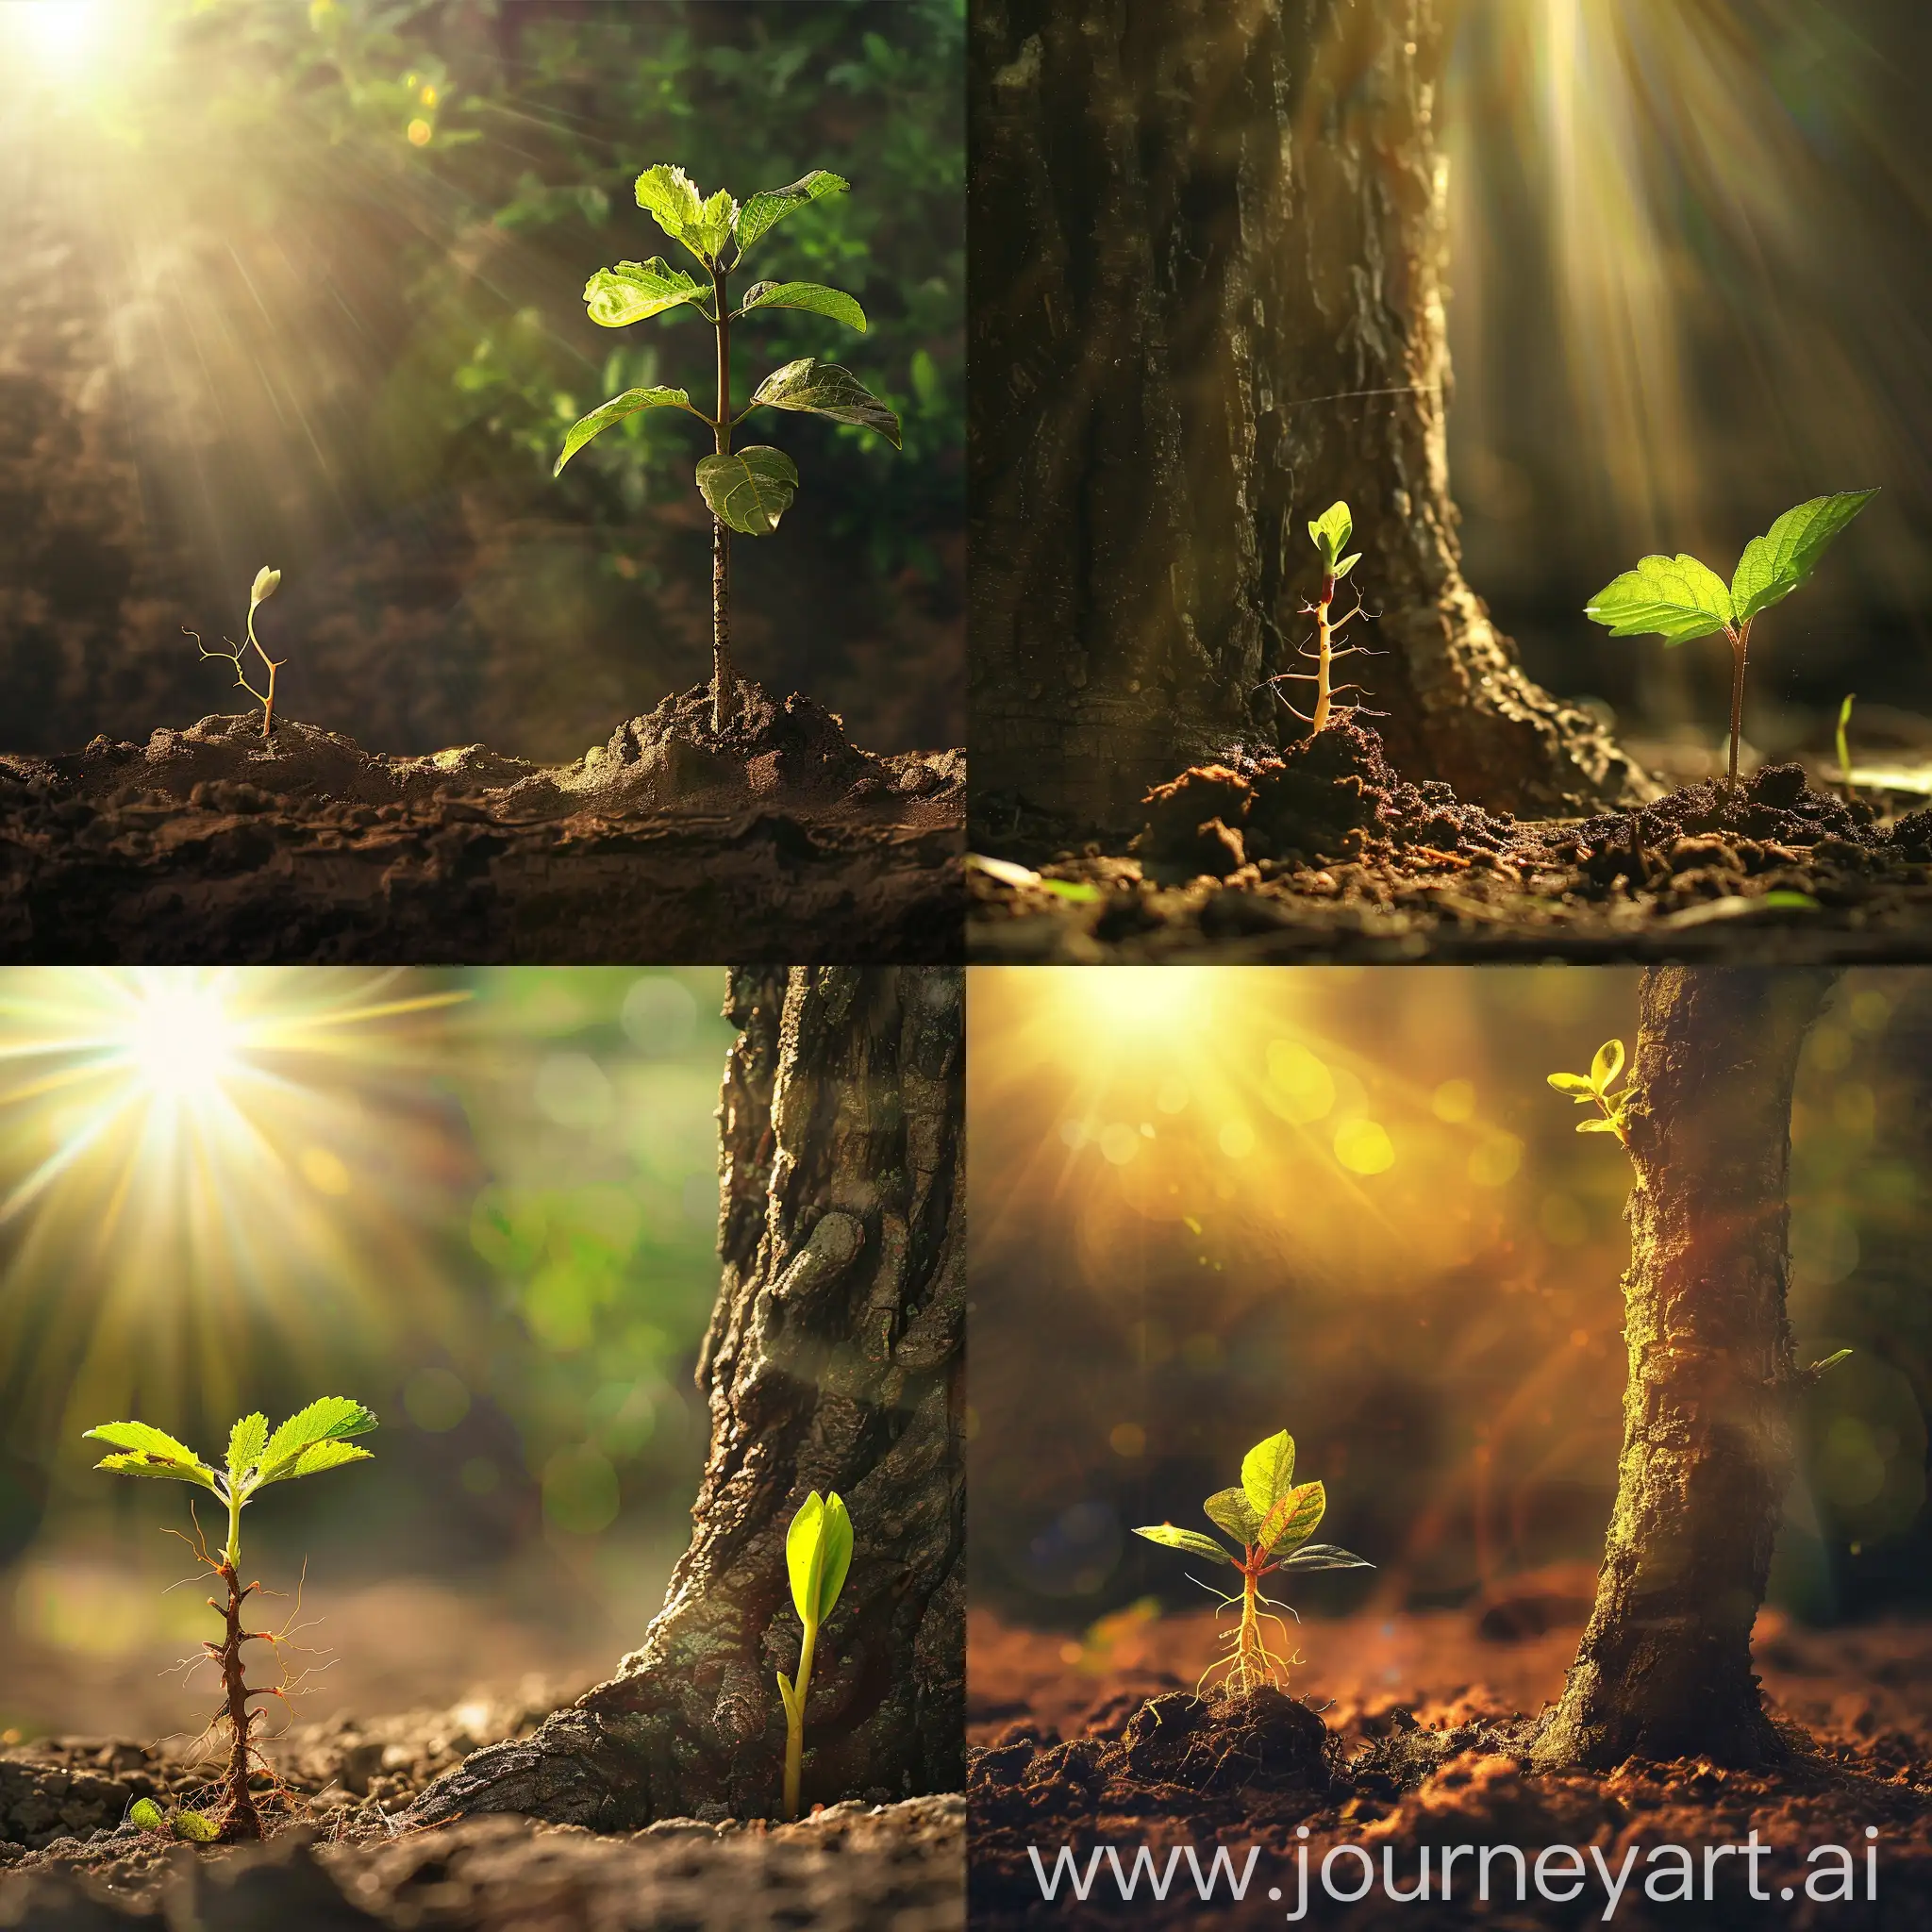 create a sunlit day with a sprout of a tree and beside it is a mature tree.